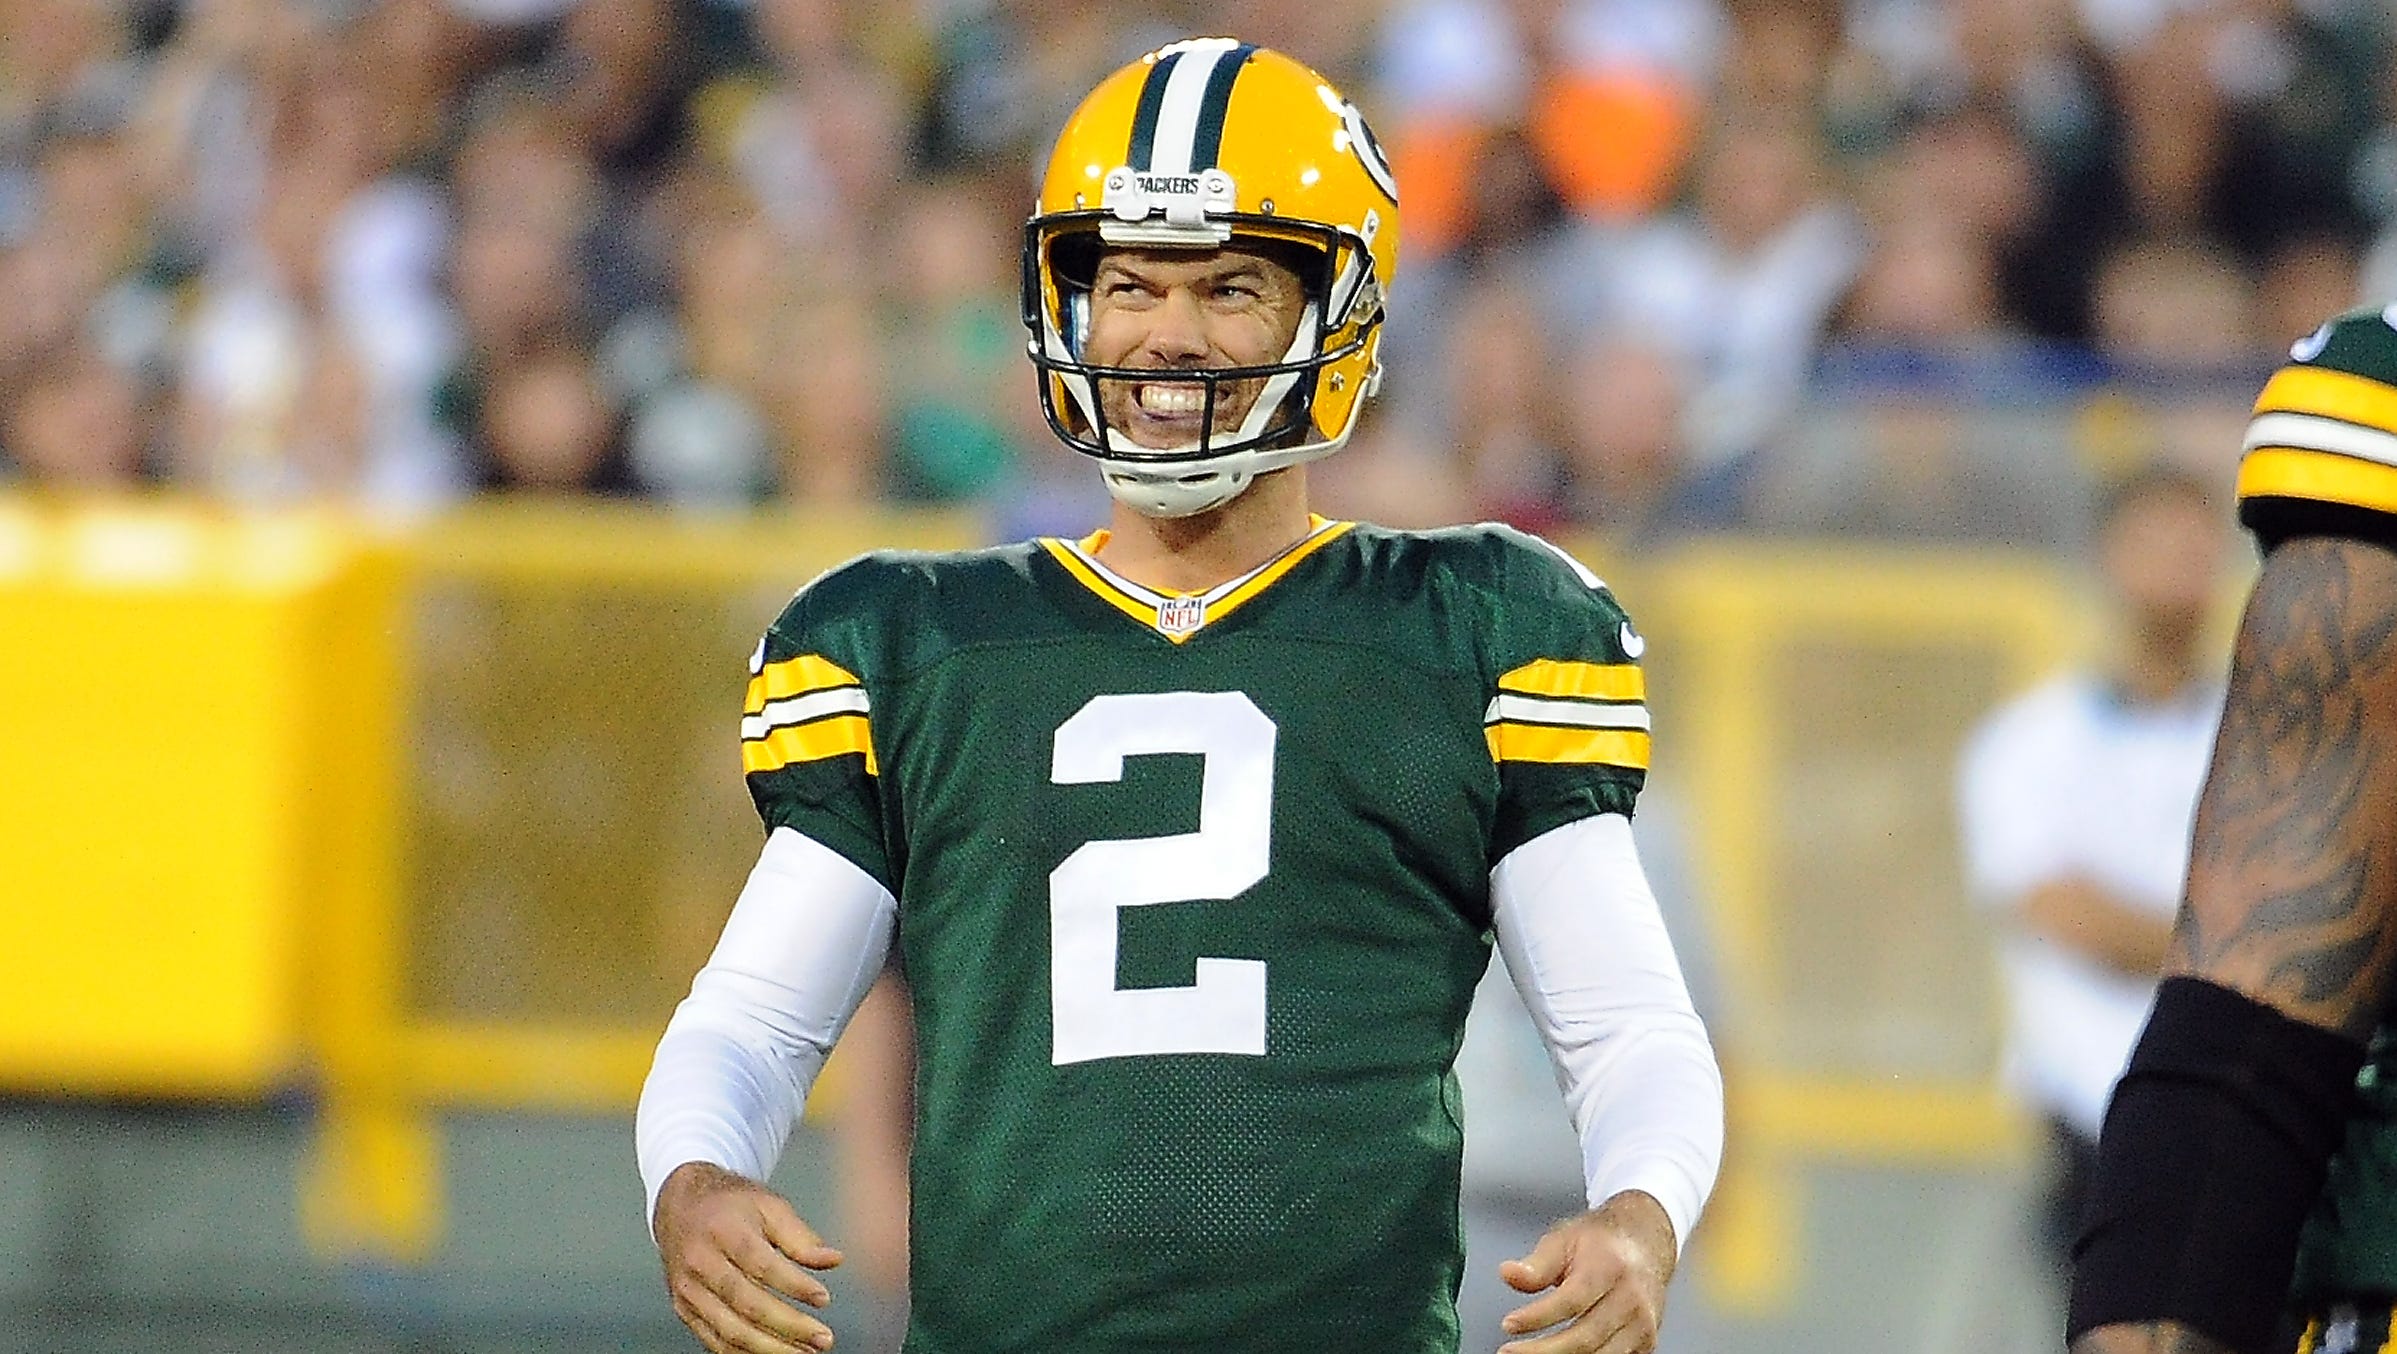 Green Bay Packers kicker Mason Crosby reacts to missing a 51-yard field goal attempt against the Philadelphia Eagles on Aug. 29, 2015, at Lambeau Field.